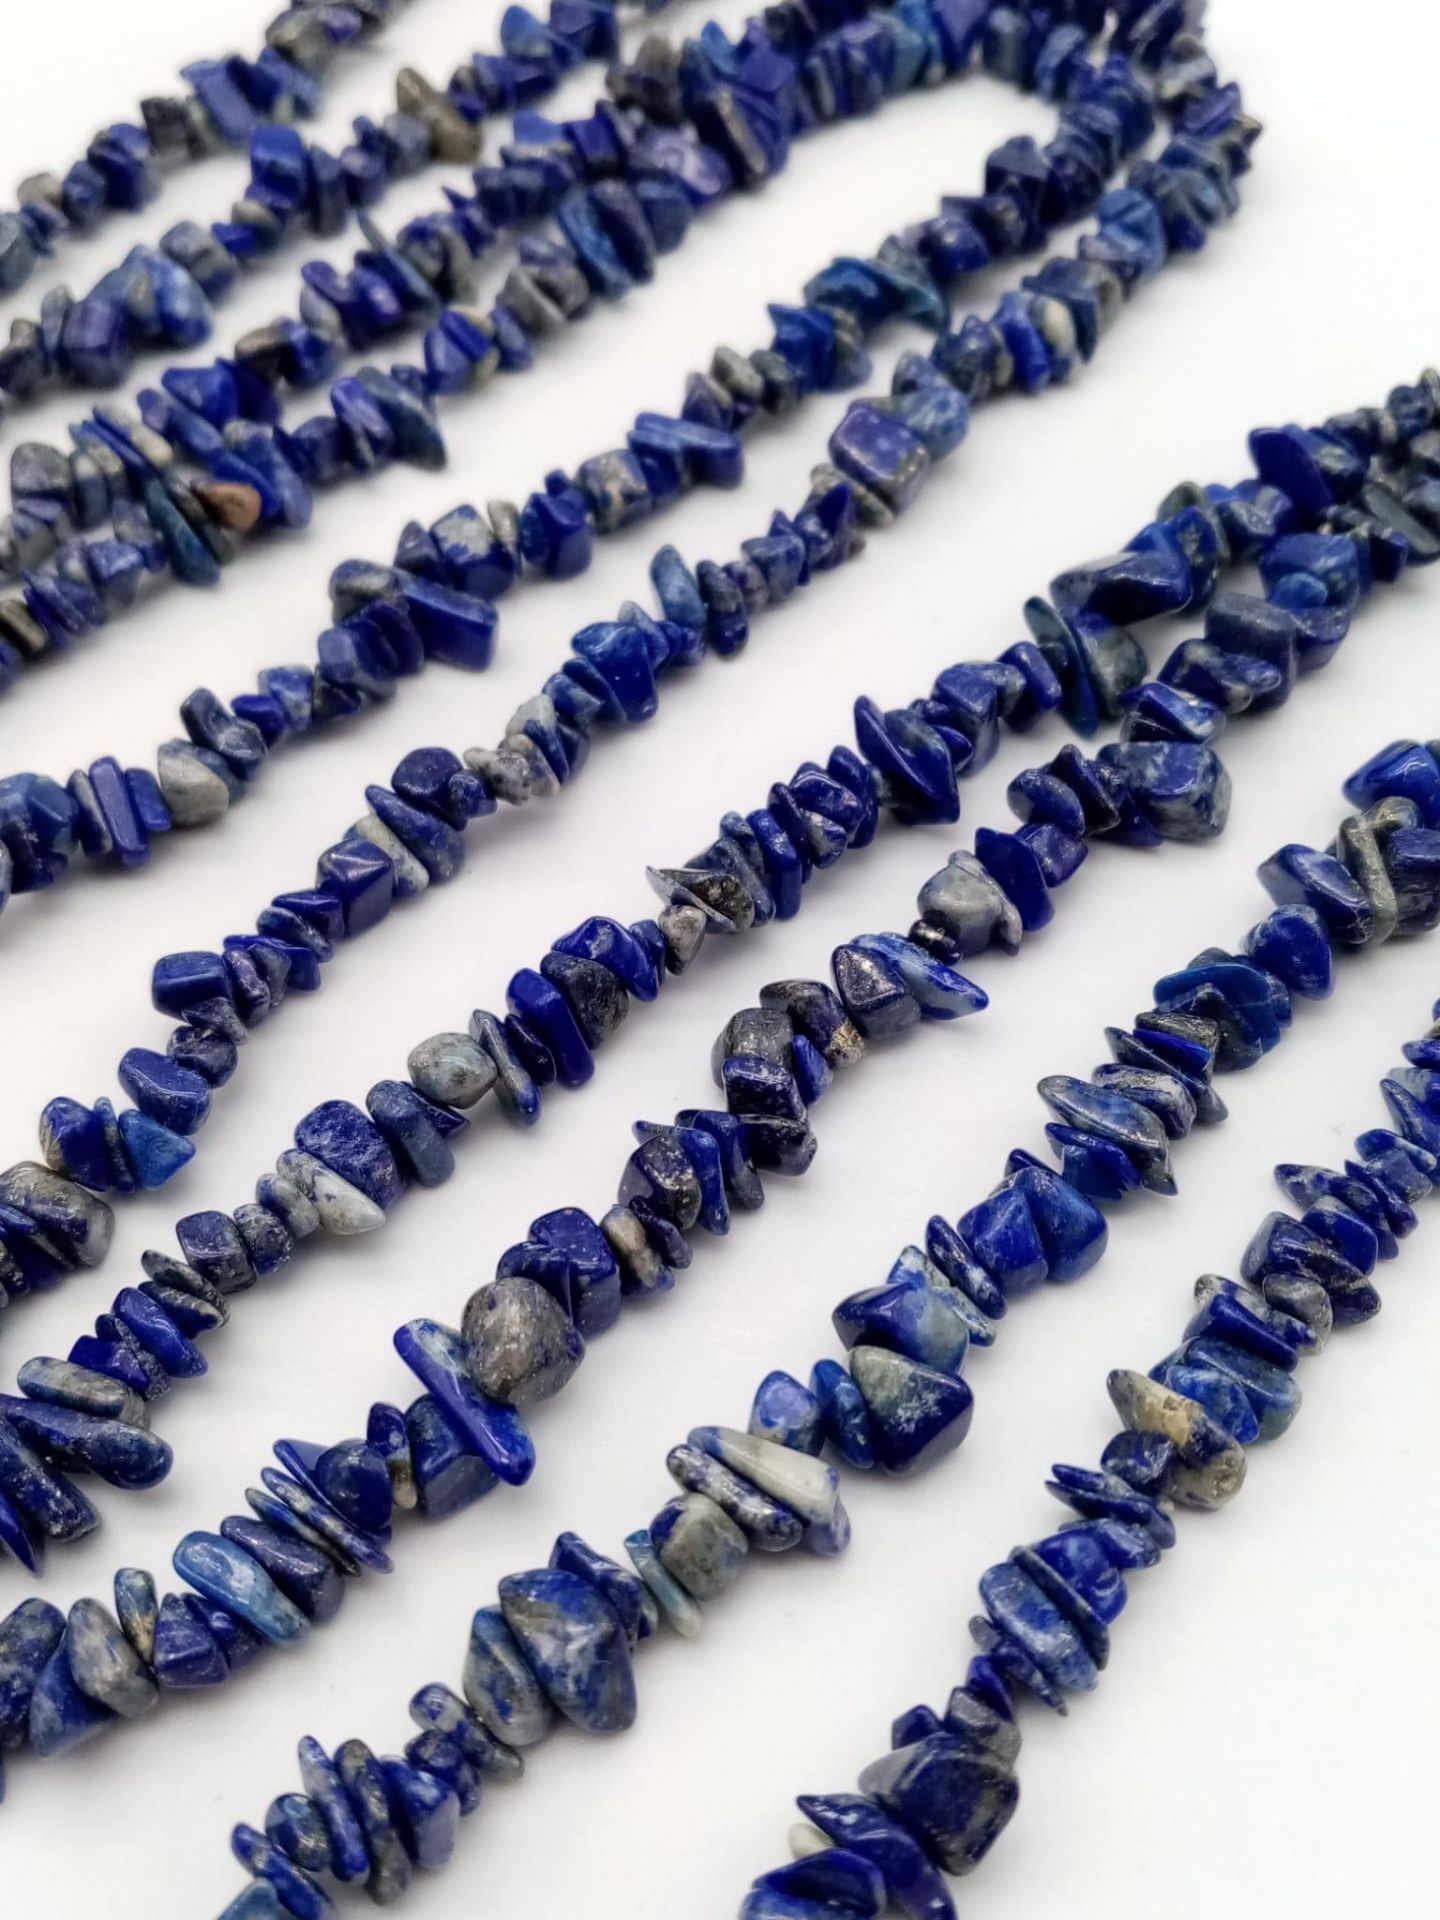 Two Natural Rough Gemstone Rope Length Necklaces. Lapis Lazuli and Turquoise. Both 150cm. - Image 5 of 6